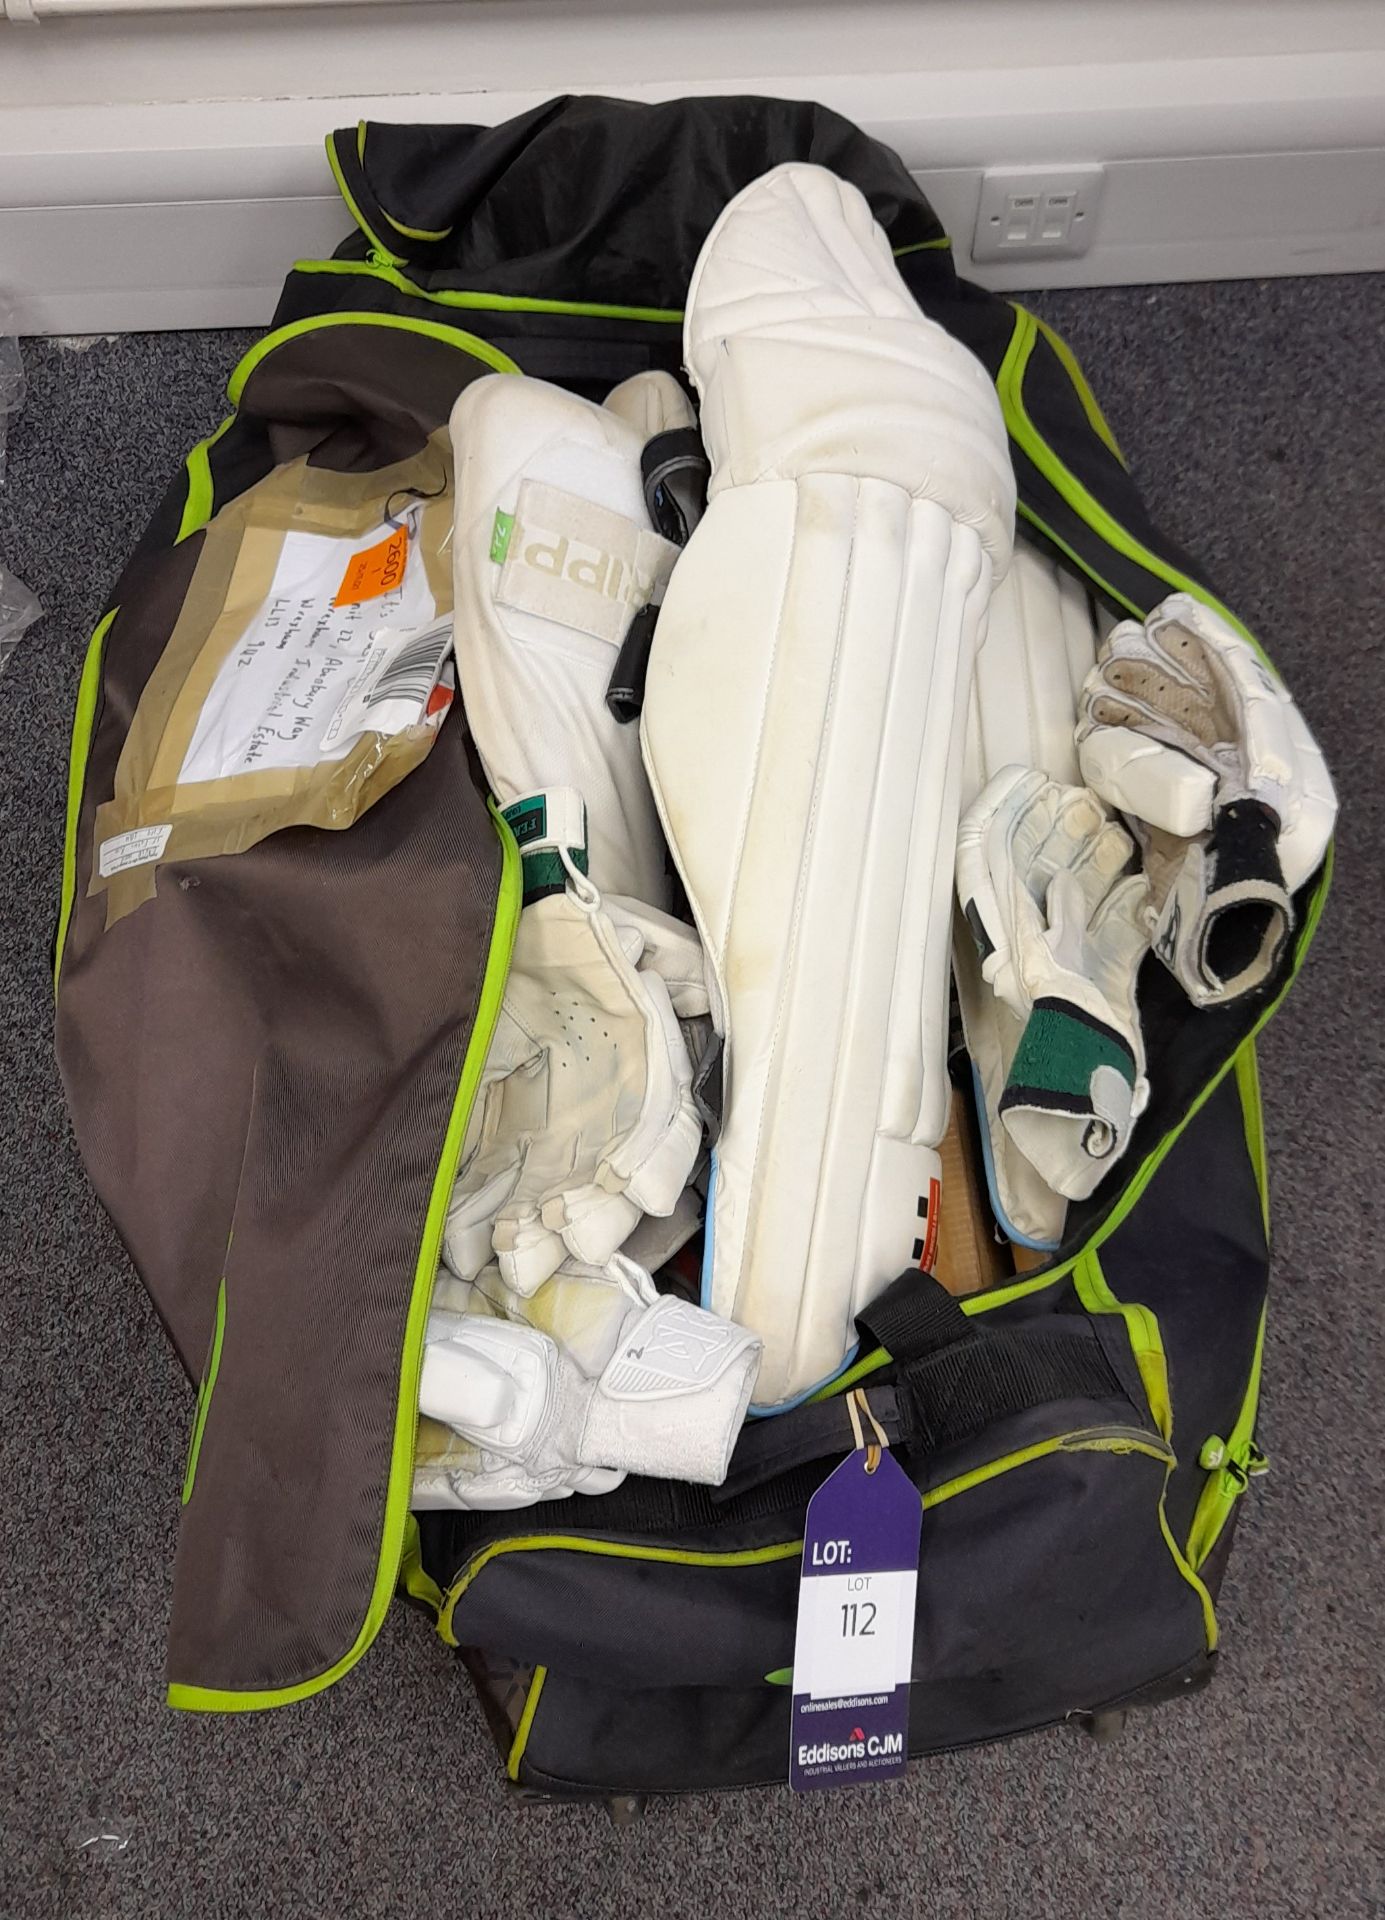 Cricket Hold All to contain Various Cricket Equipment including Helmet, Gloves, Pads, Body